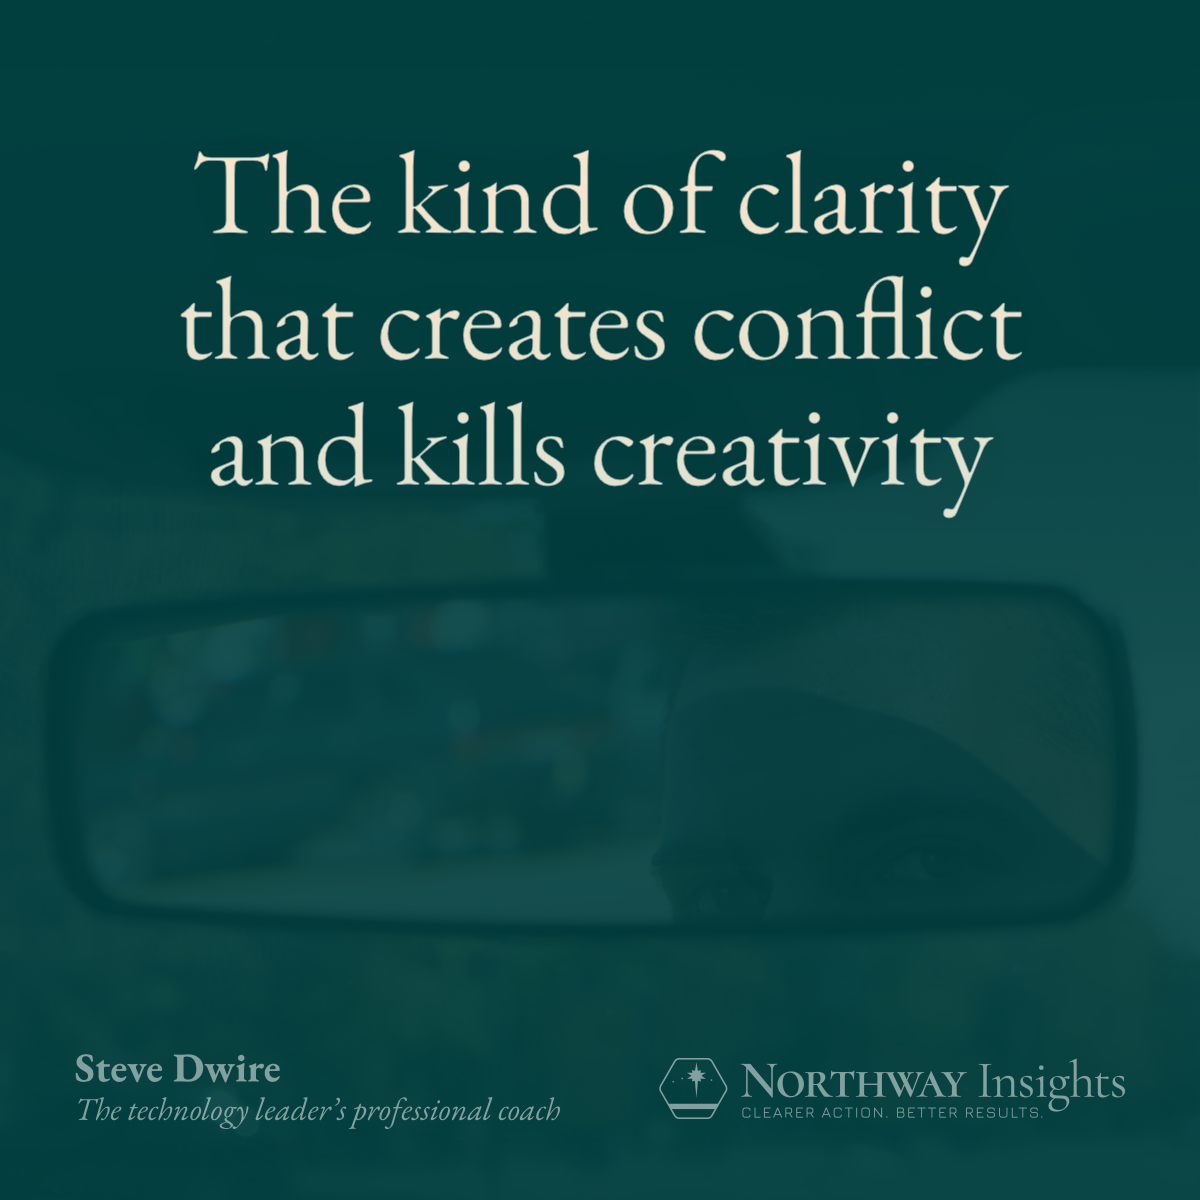 The kind of clarity that creates conflict and kills creativity